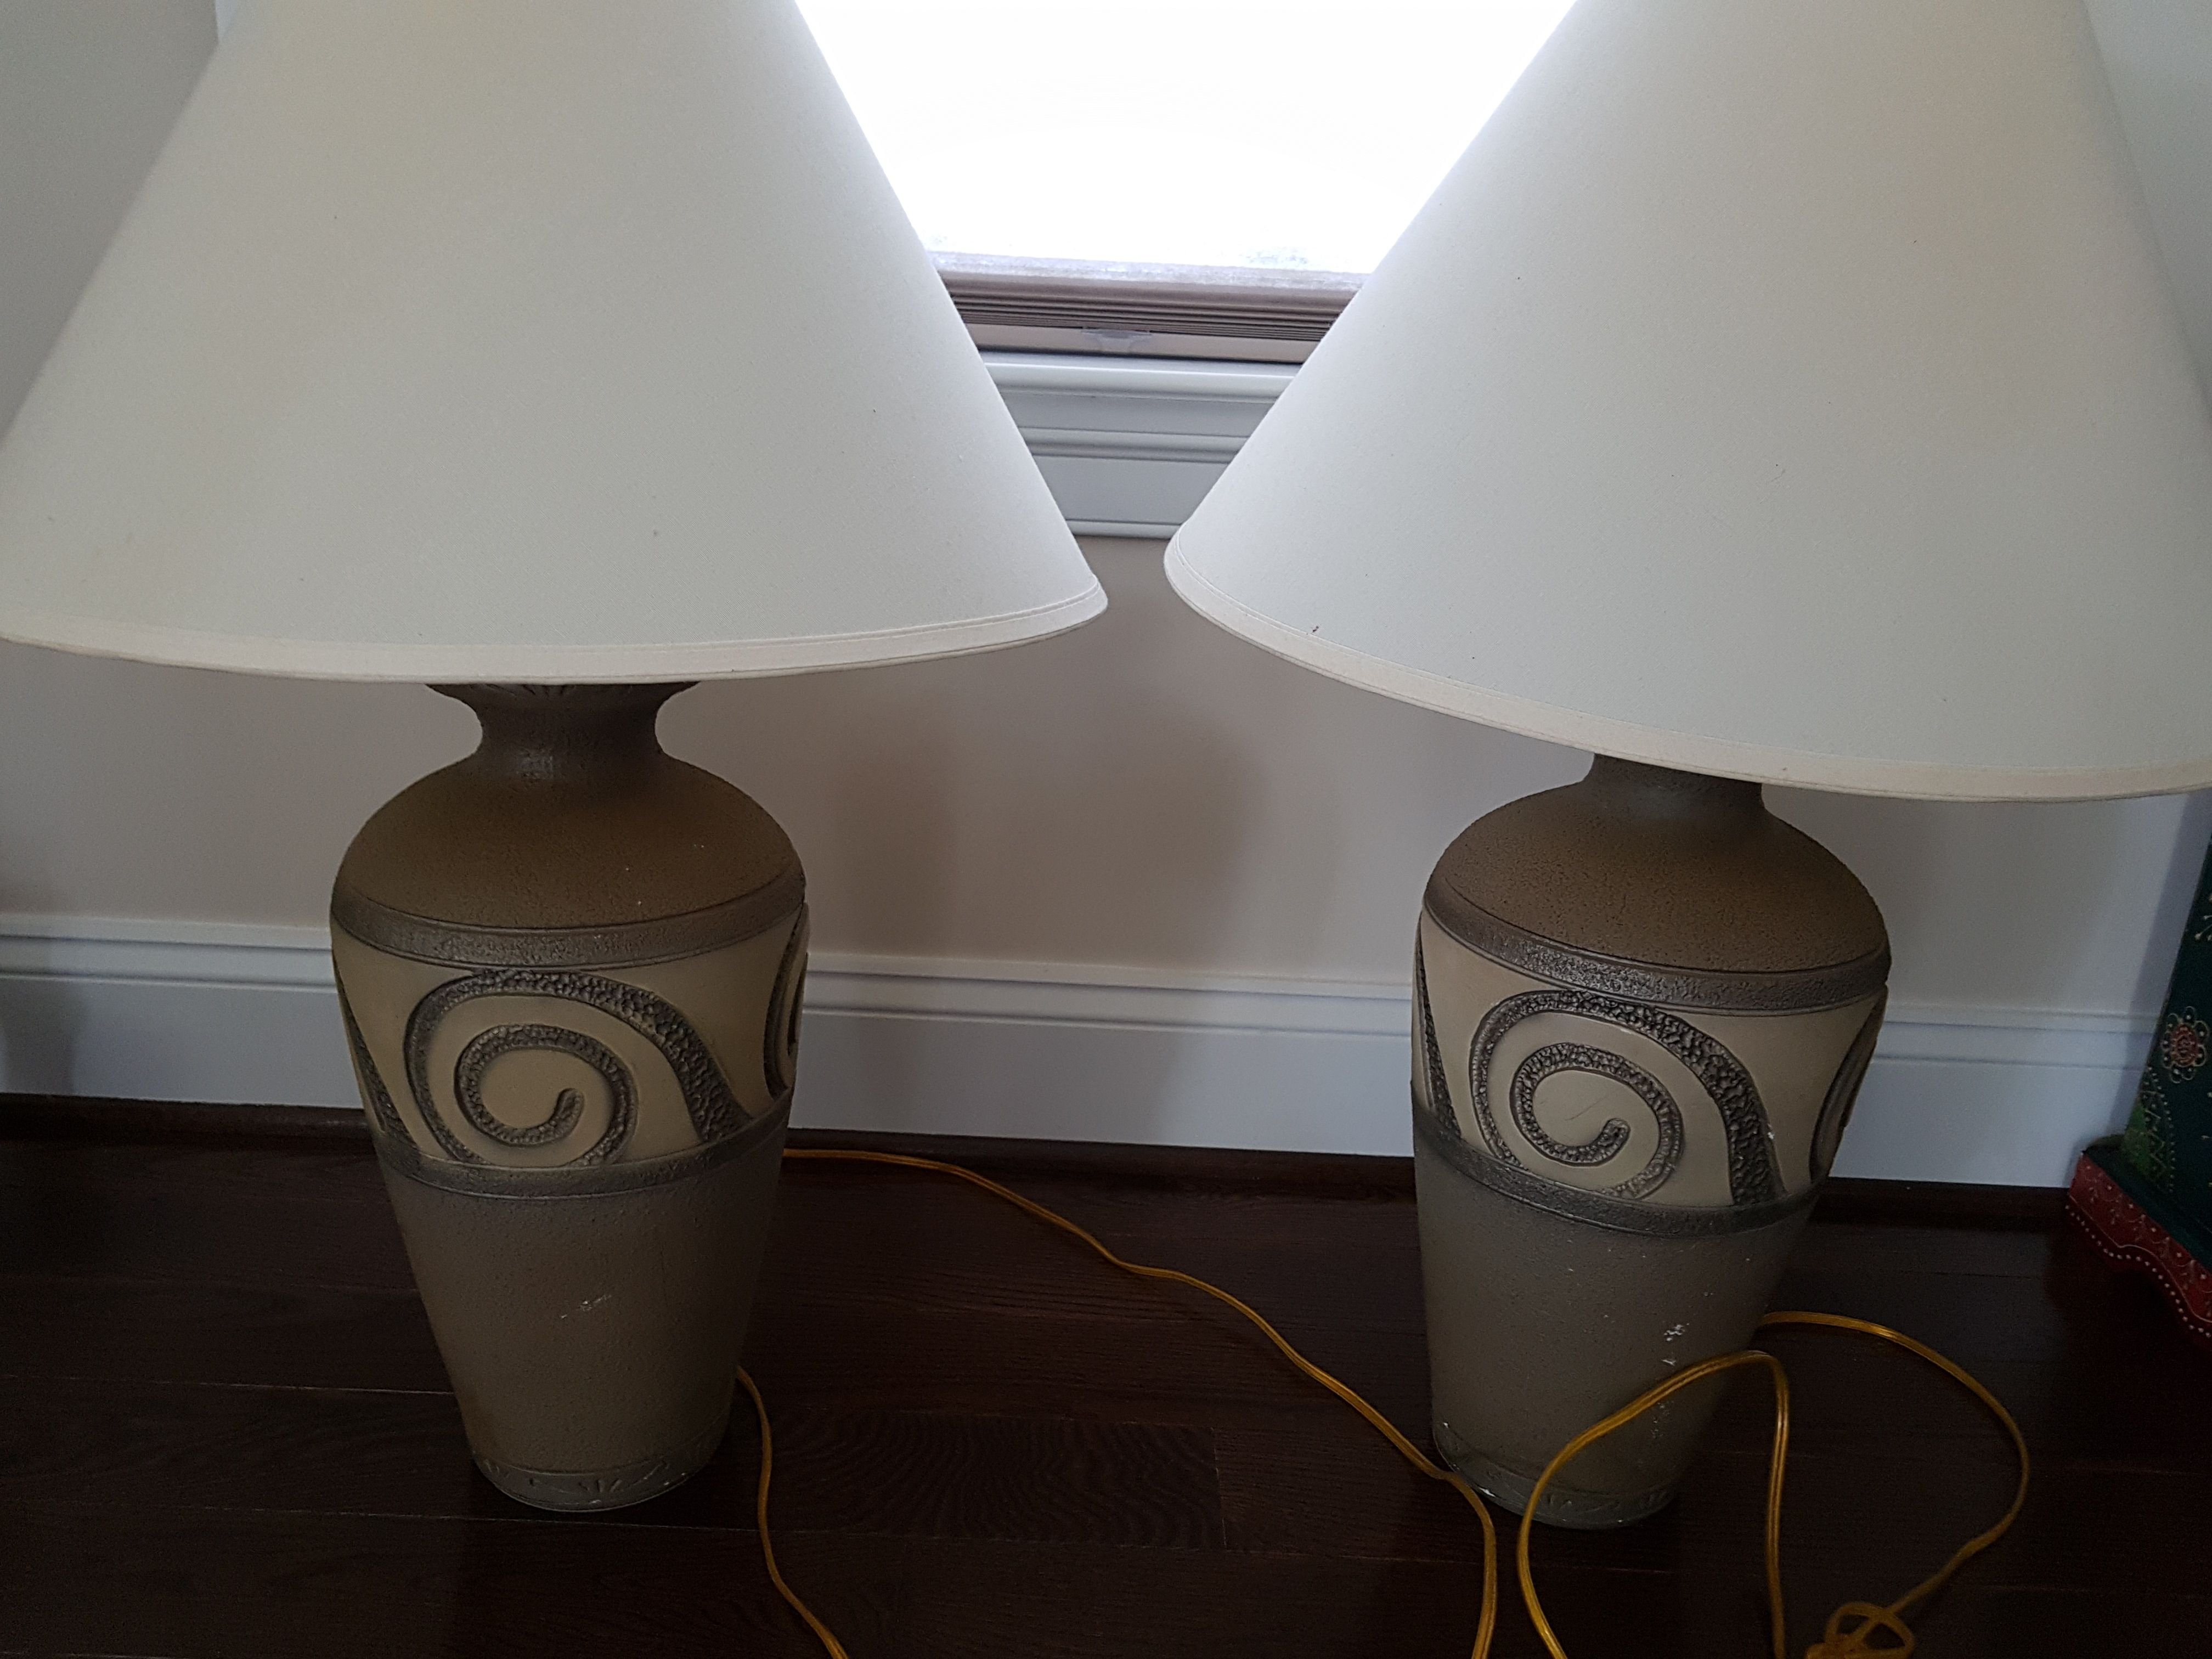 Set of 2 side table lamps in very good condition